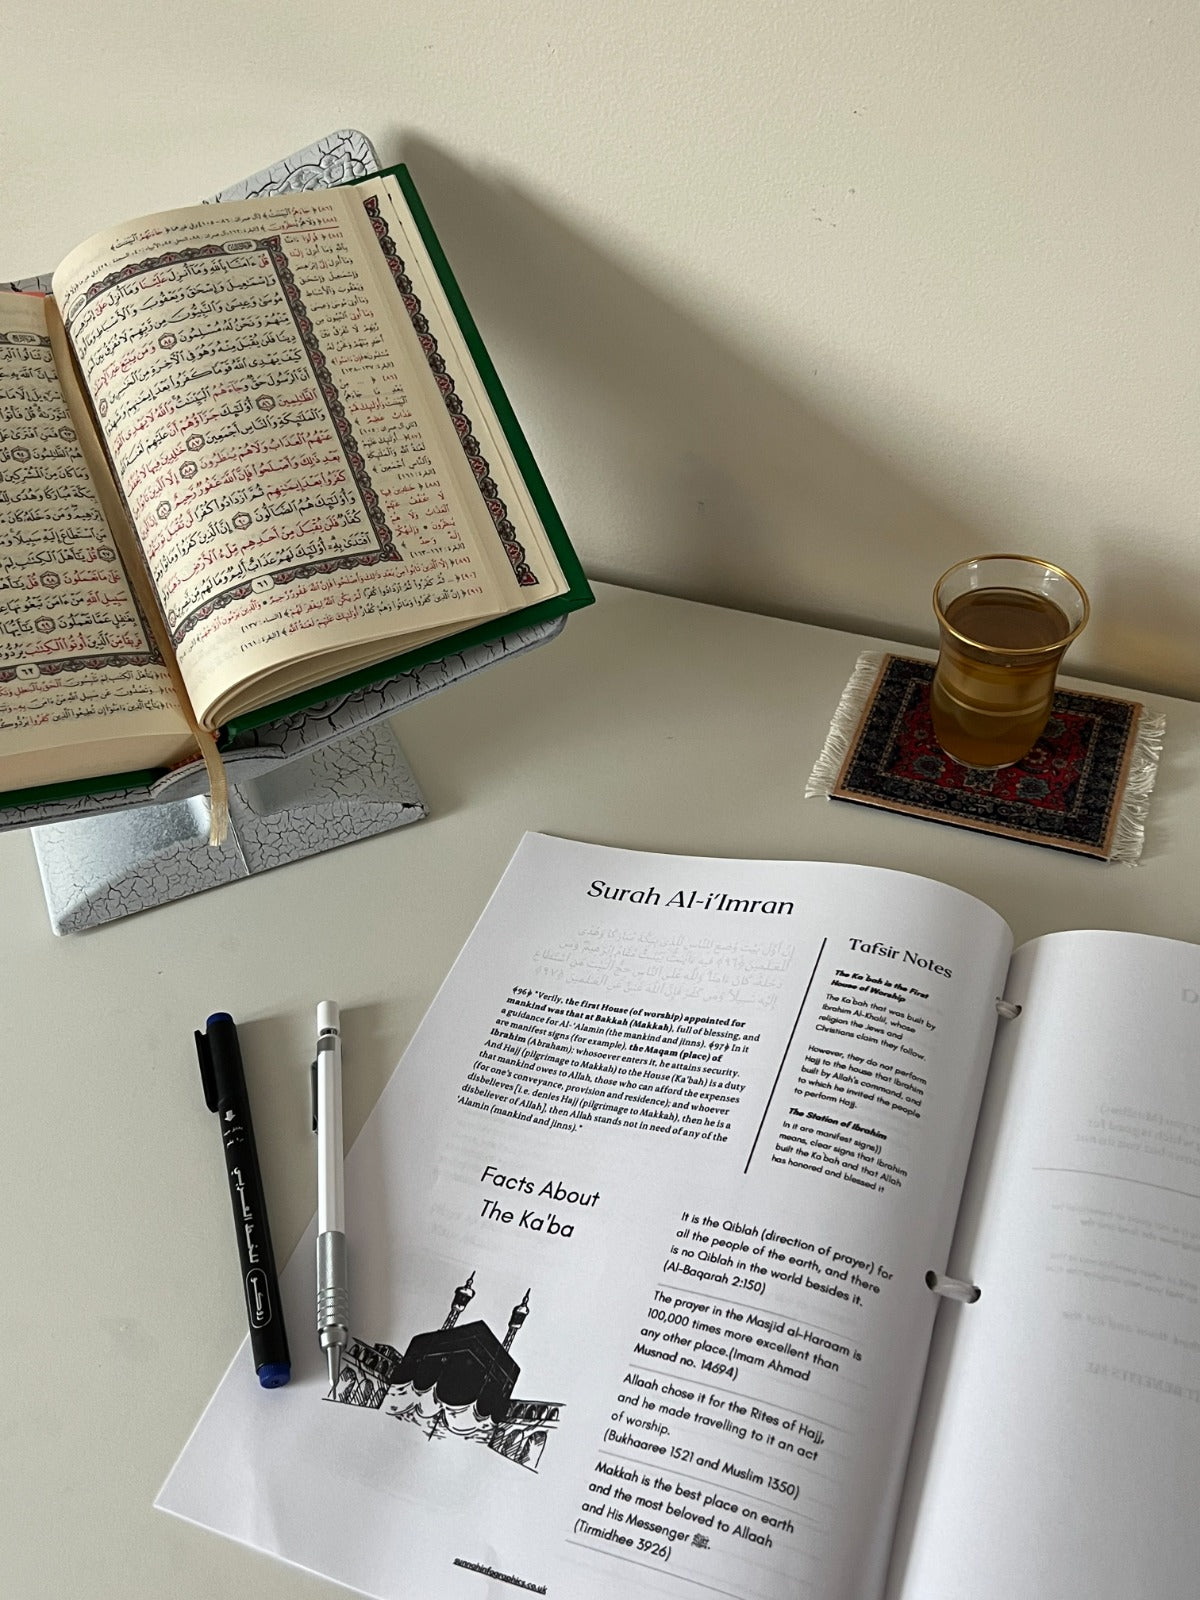 Qur'an Journal is a collection of carefully selected Ayat from the Noble Qur'an along with the translation and tafseer.